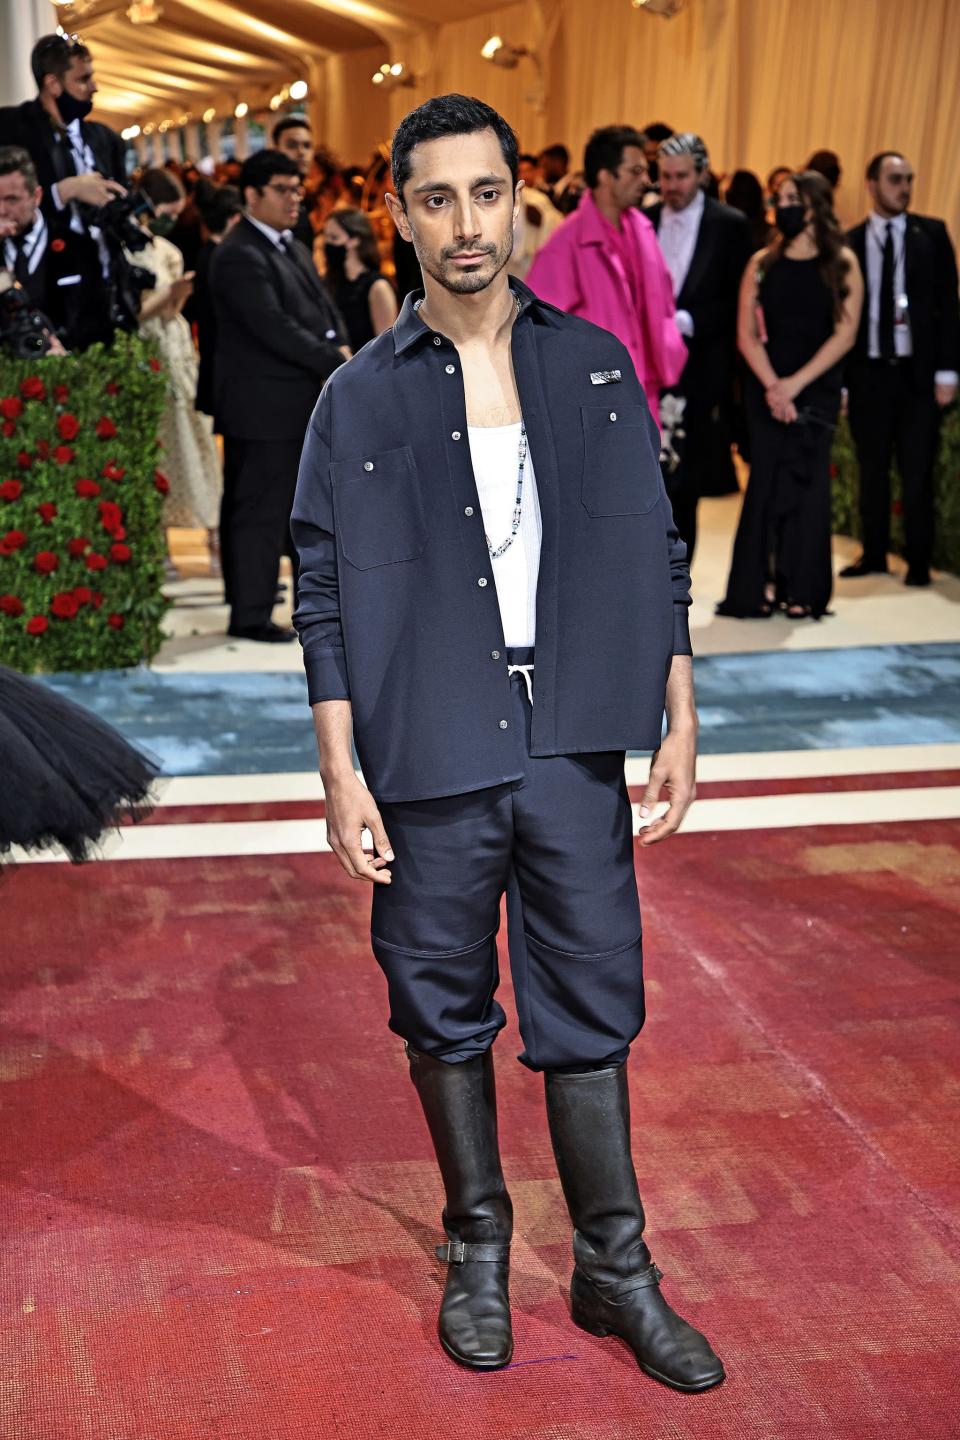 <p>Ahmed took the Met Gala as an opportunity to make a political statement and paid homage to the immigrant workers that kept the Gilded Age alive. While many celebrities represented the golden glitz that made up the Gilded Age, Ahmed wanted to acknowledge the less-than-glamorous reality for immigrants. With his 4SDesigns by Angelo Urrutia navy blue work jacket, leather work boots, and an understated Cartier necklace inspired by Indian culture, Ahmed made sure to honor the background players of the Gilded Age.</p>